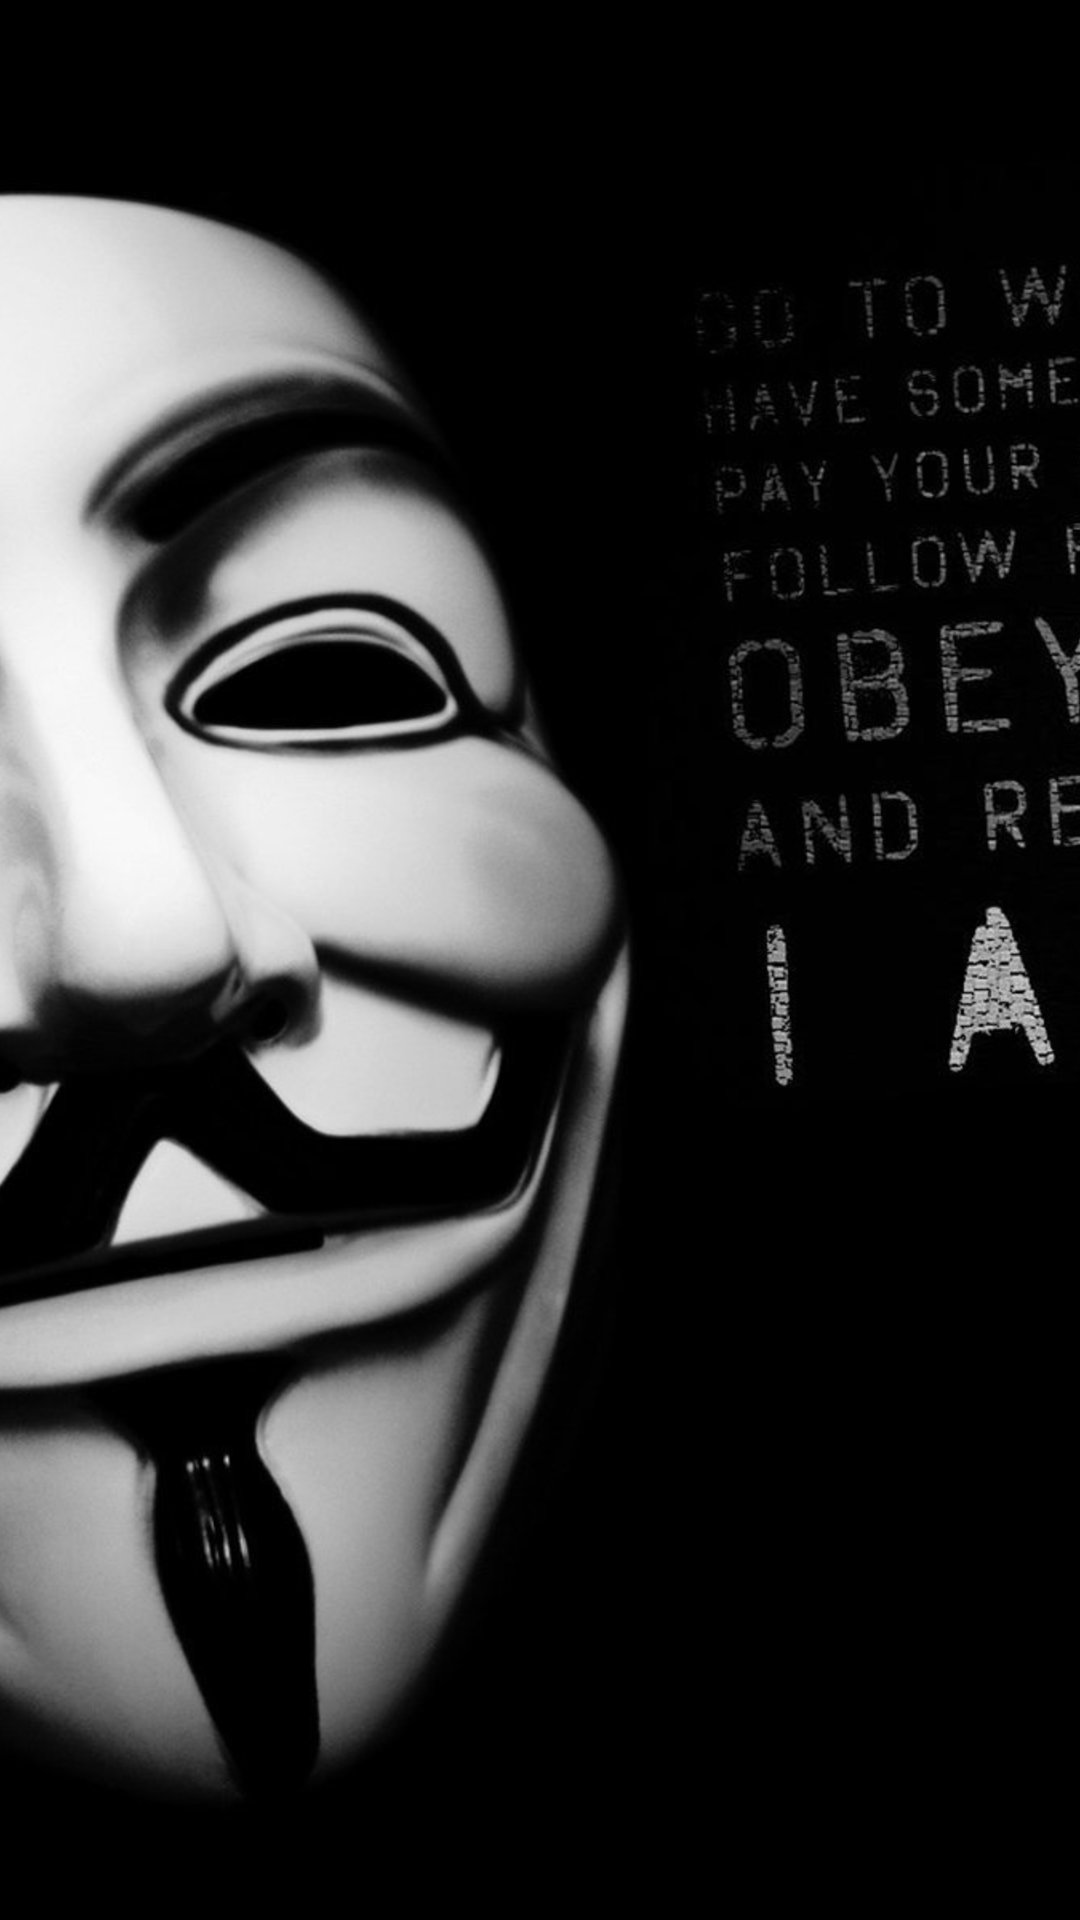 Anonymous Full Hd Wallpaper For Iphone - Iphone Wallpaper Full Hd -  1080x1920 Wallpaper 